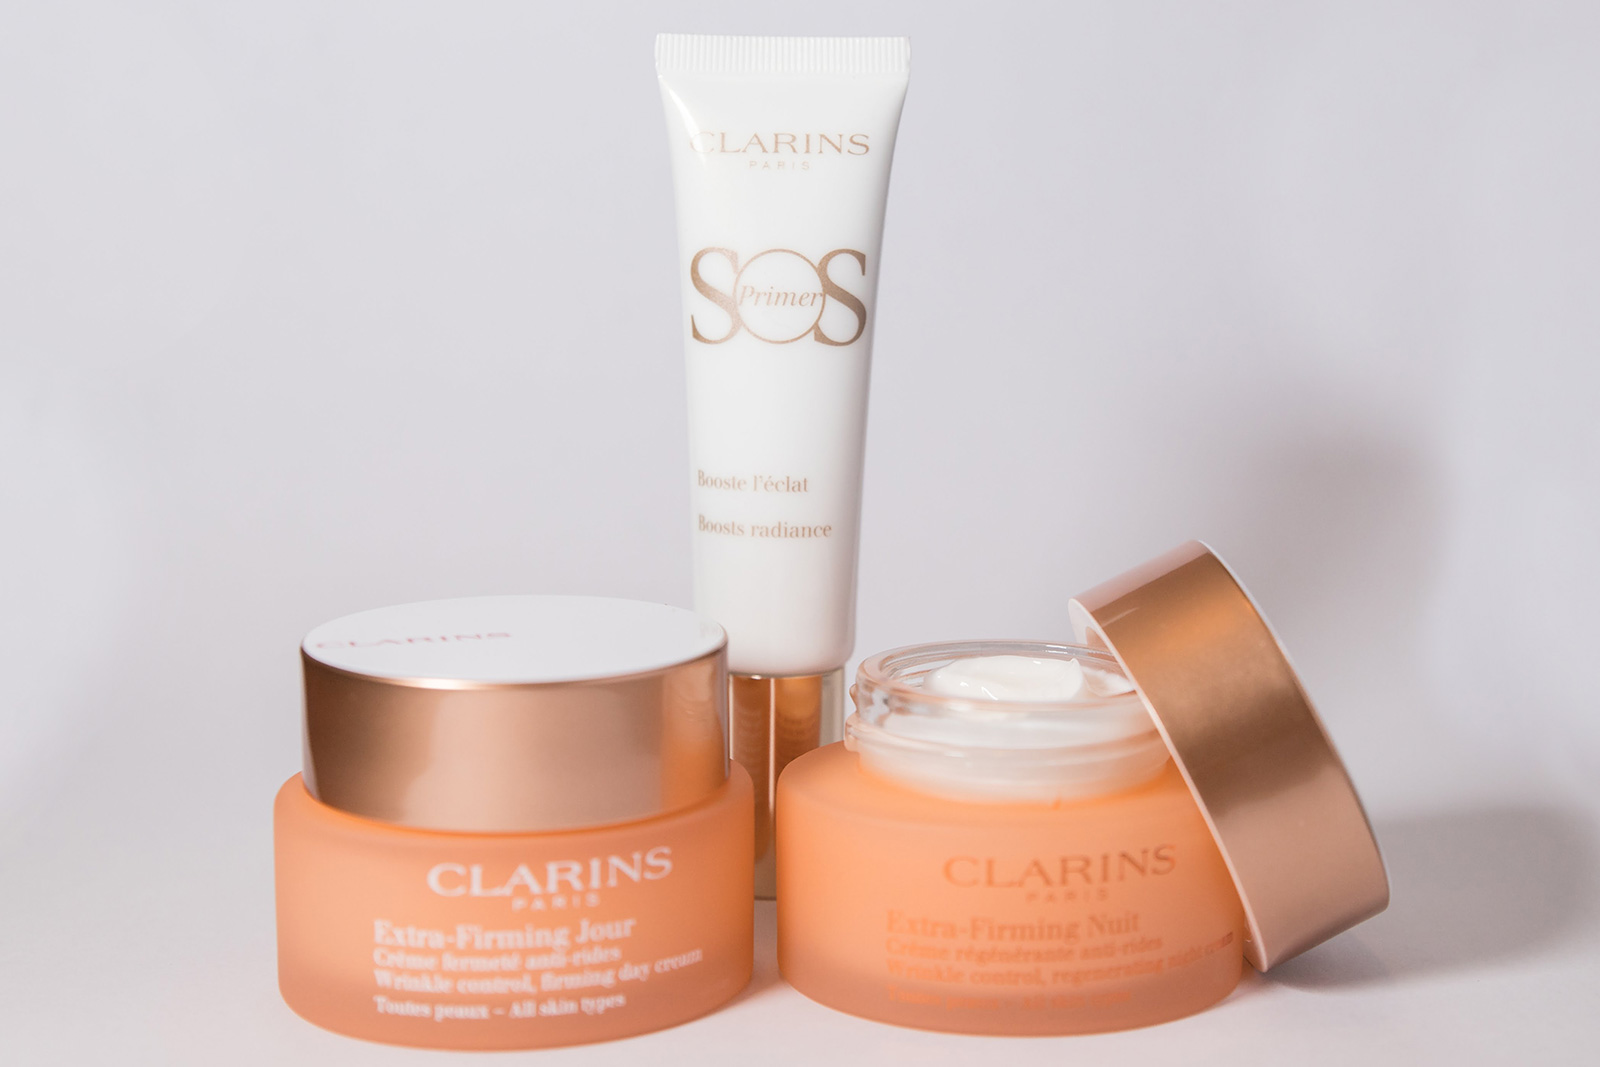 Clarins Skin Care Product Review